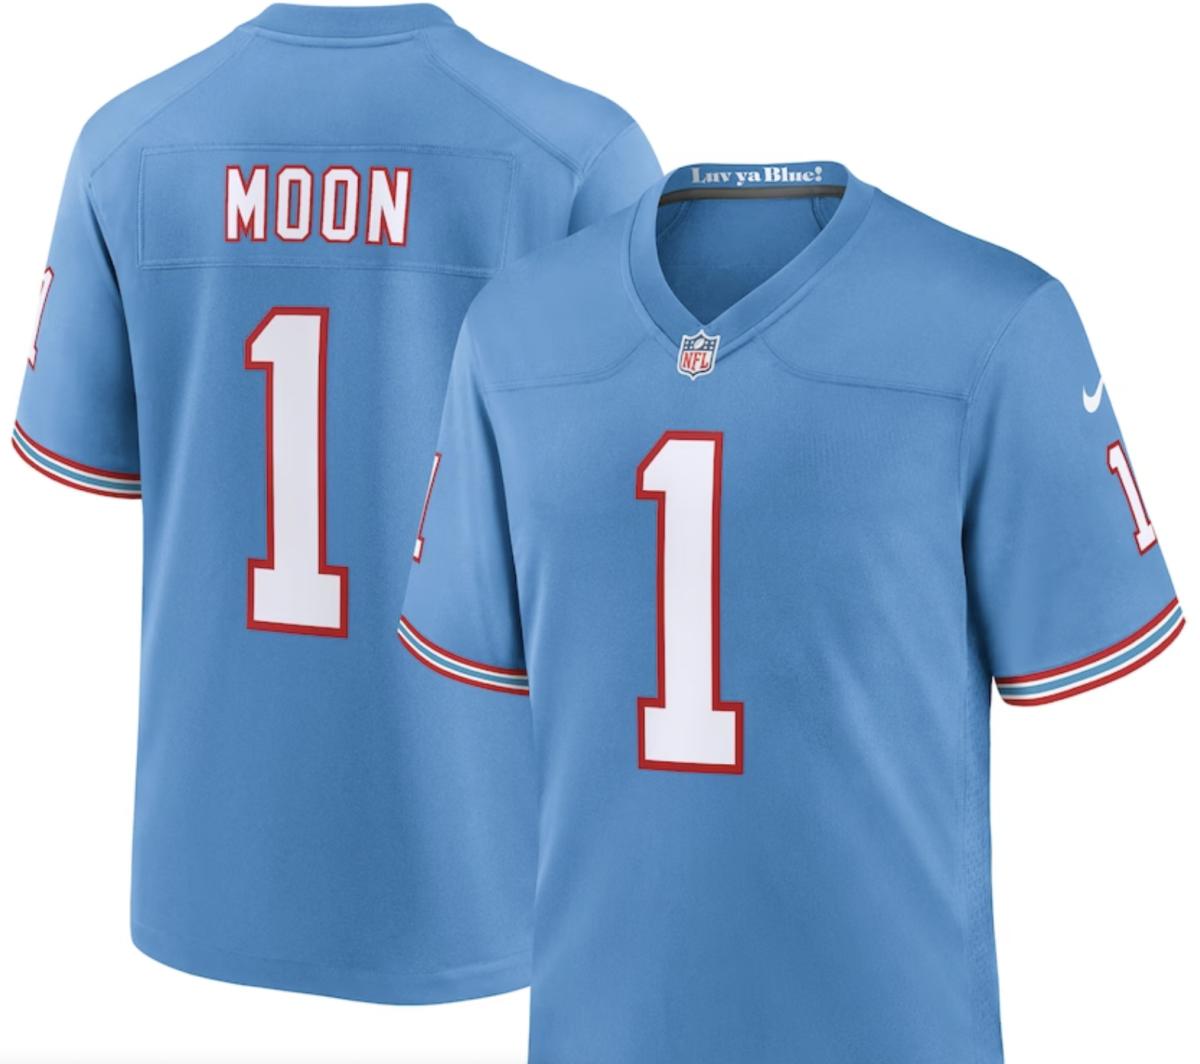 Where to buy Tennessee Titans 'Oilers' Throwback Jersey